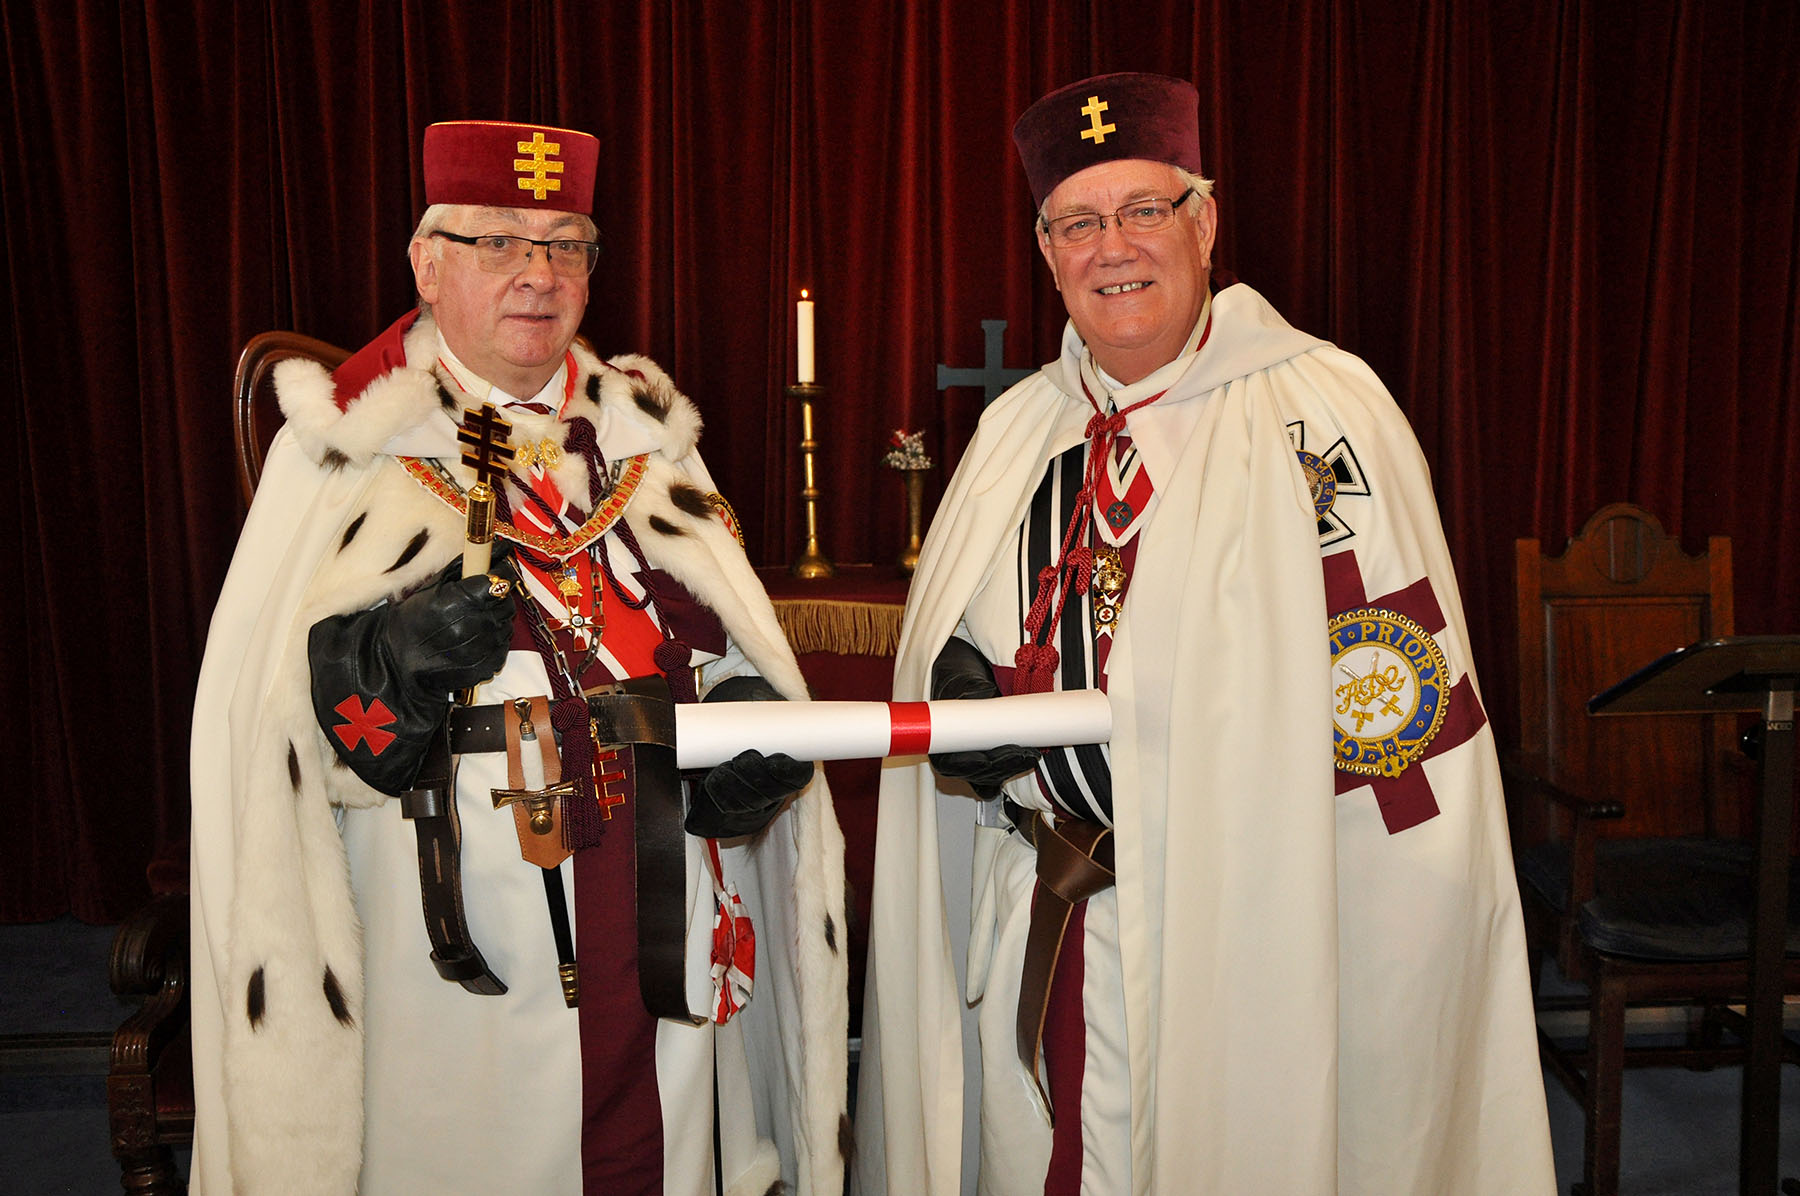 The Consecration of the Grand Master’s Bodyguard Preceptory